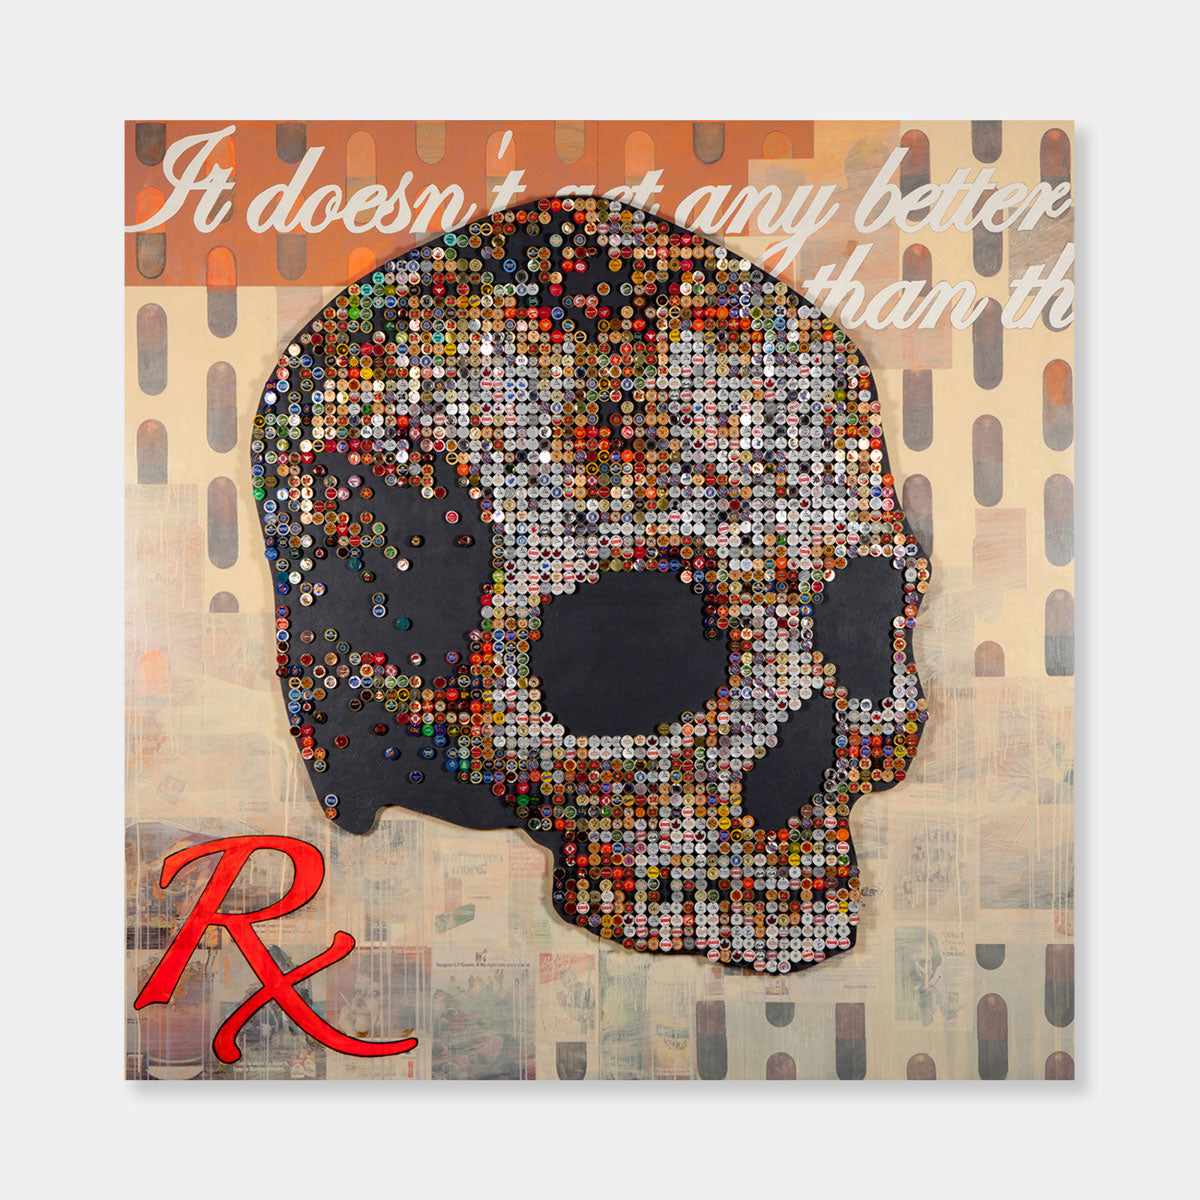 Artsuite - Shimmer Skull - Original artwork by Shaun Richards.  Oil and mixed media on canvas.  96×96 inches.  Richards’ work has broadly focused on political incentives, socio-economic issues, notions of beauty, and societal norms for the better part of a decade.  He has described it as a focus on our complicity and responsibility for the world in which we live—particularly those institutions, and paradigms that define contemporary western society.